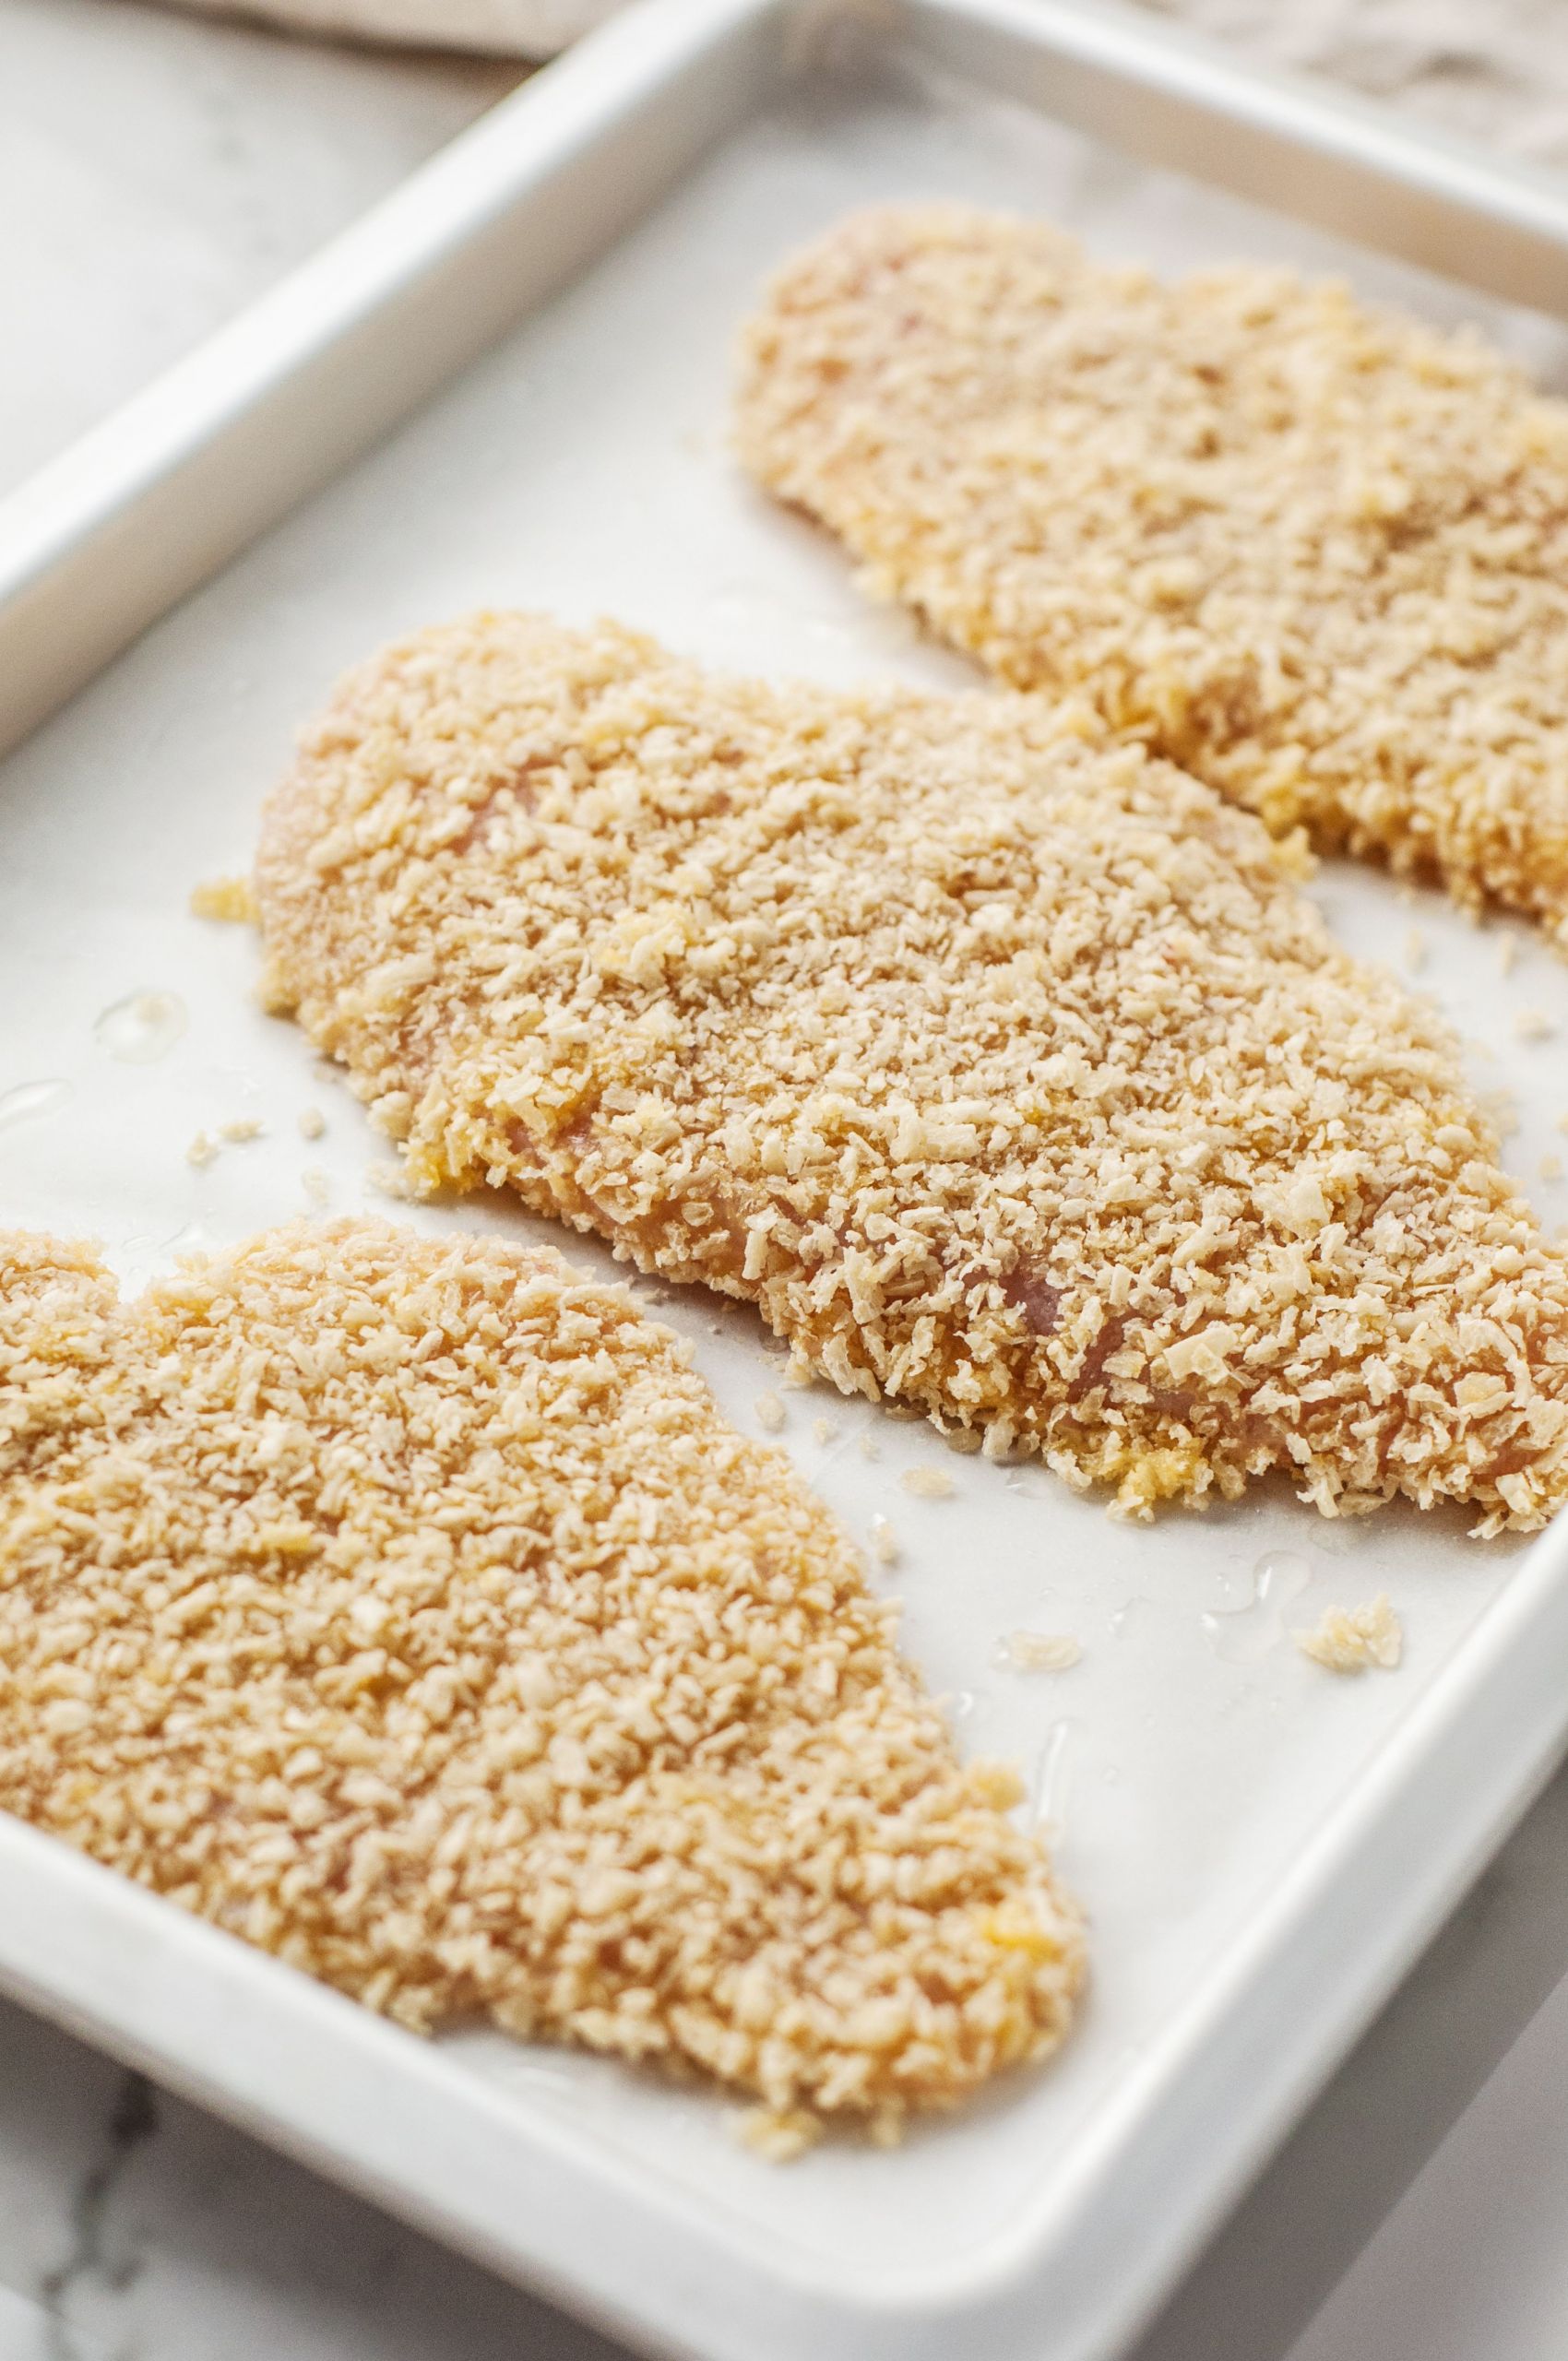 Baked Breaded Chicken Breast
 Oven Baked Breaded Chicken Breasts Meat Passover